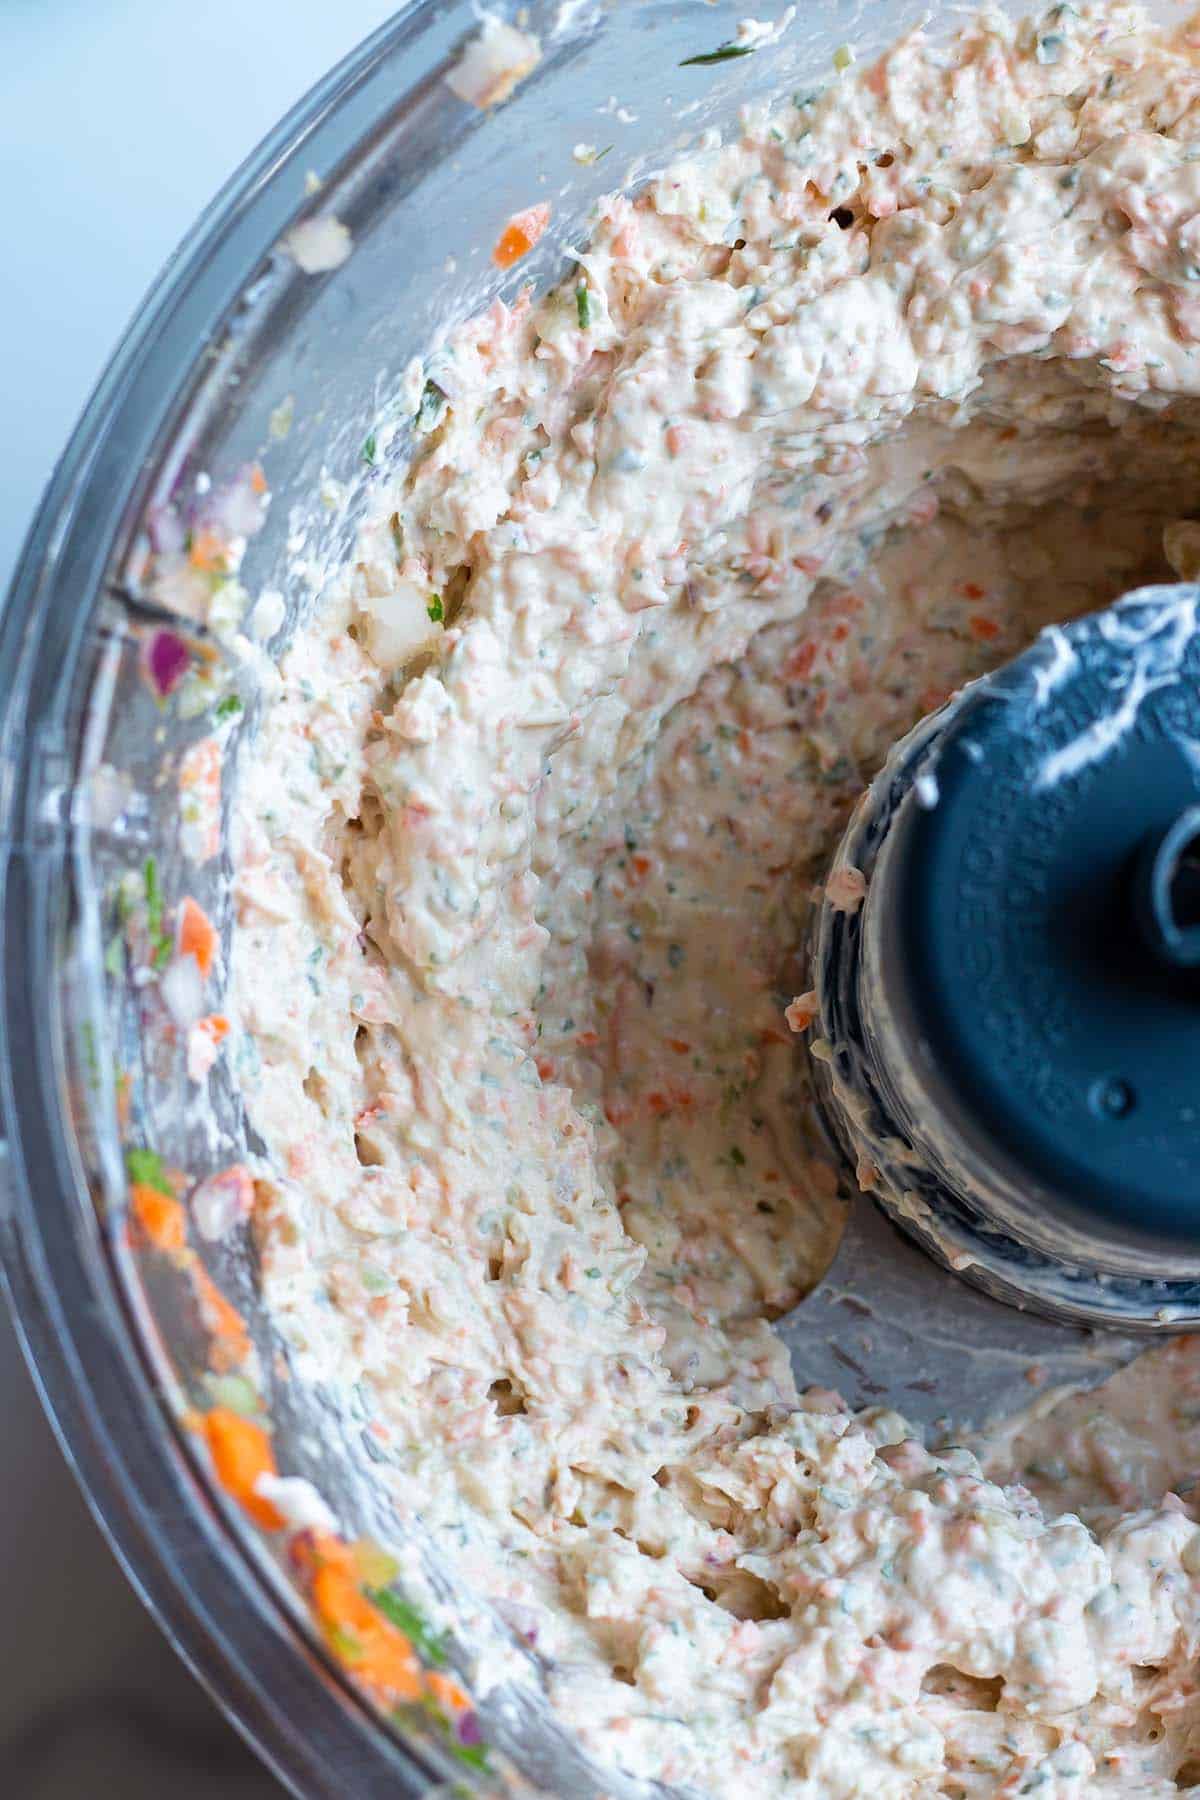 A food processor with cream cheese and diced veggies.